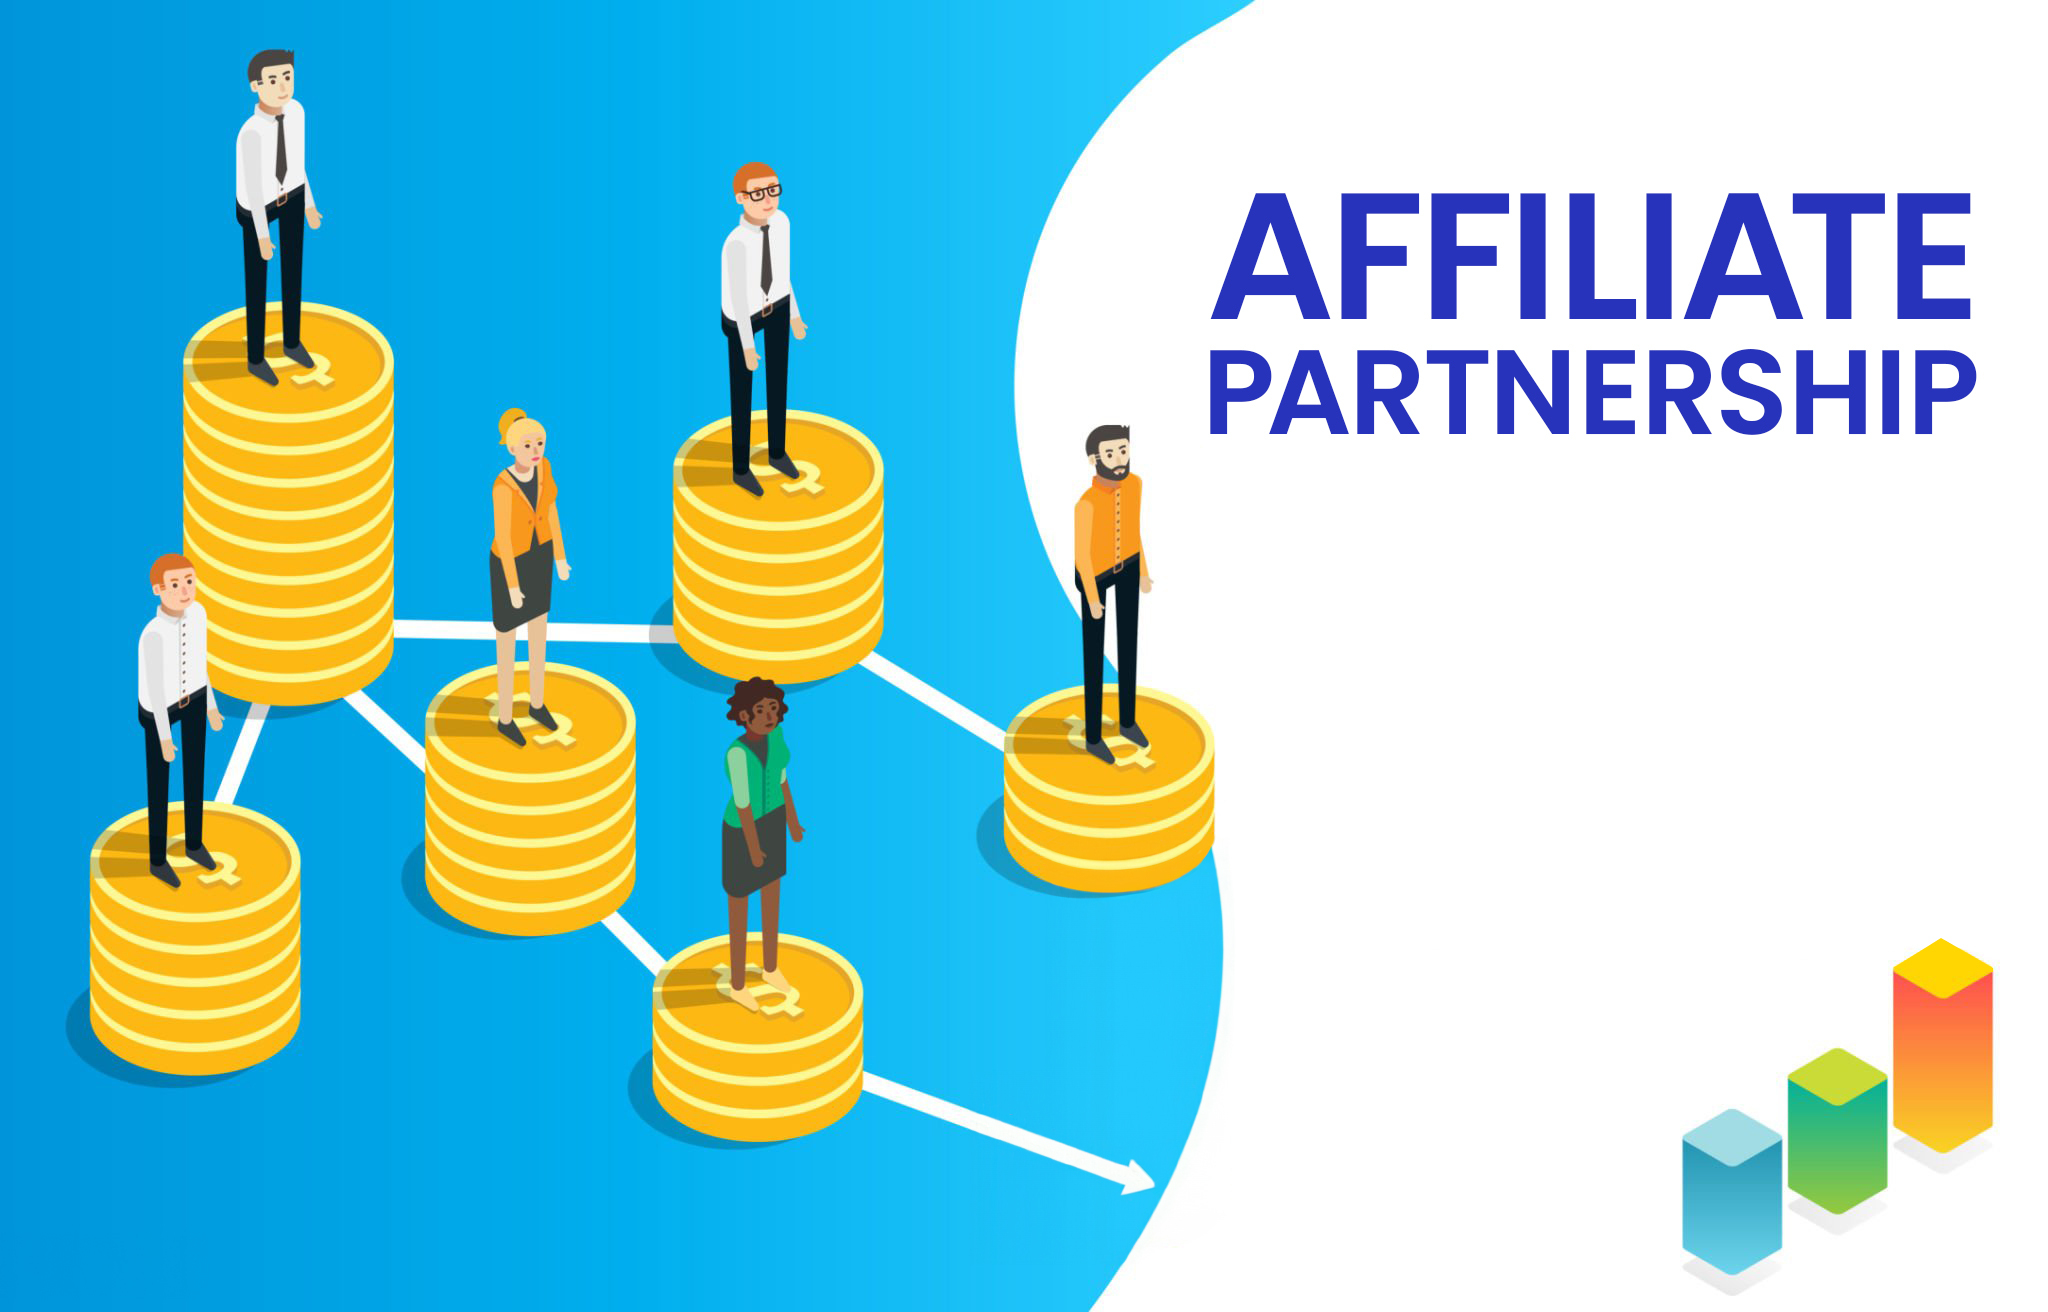 Exploring what is an affiliate partnership and its impact on business growth, featured on Mosaic Inc's blog.